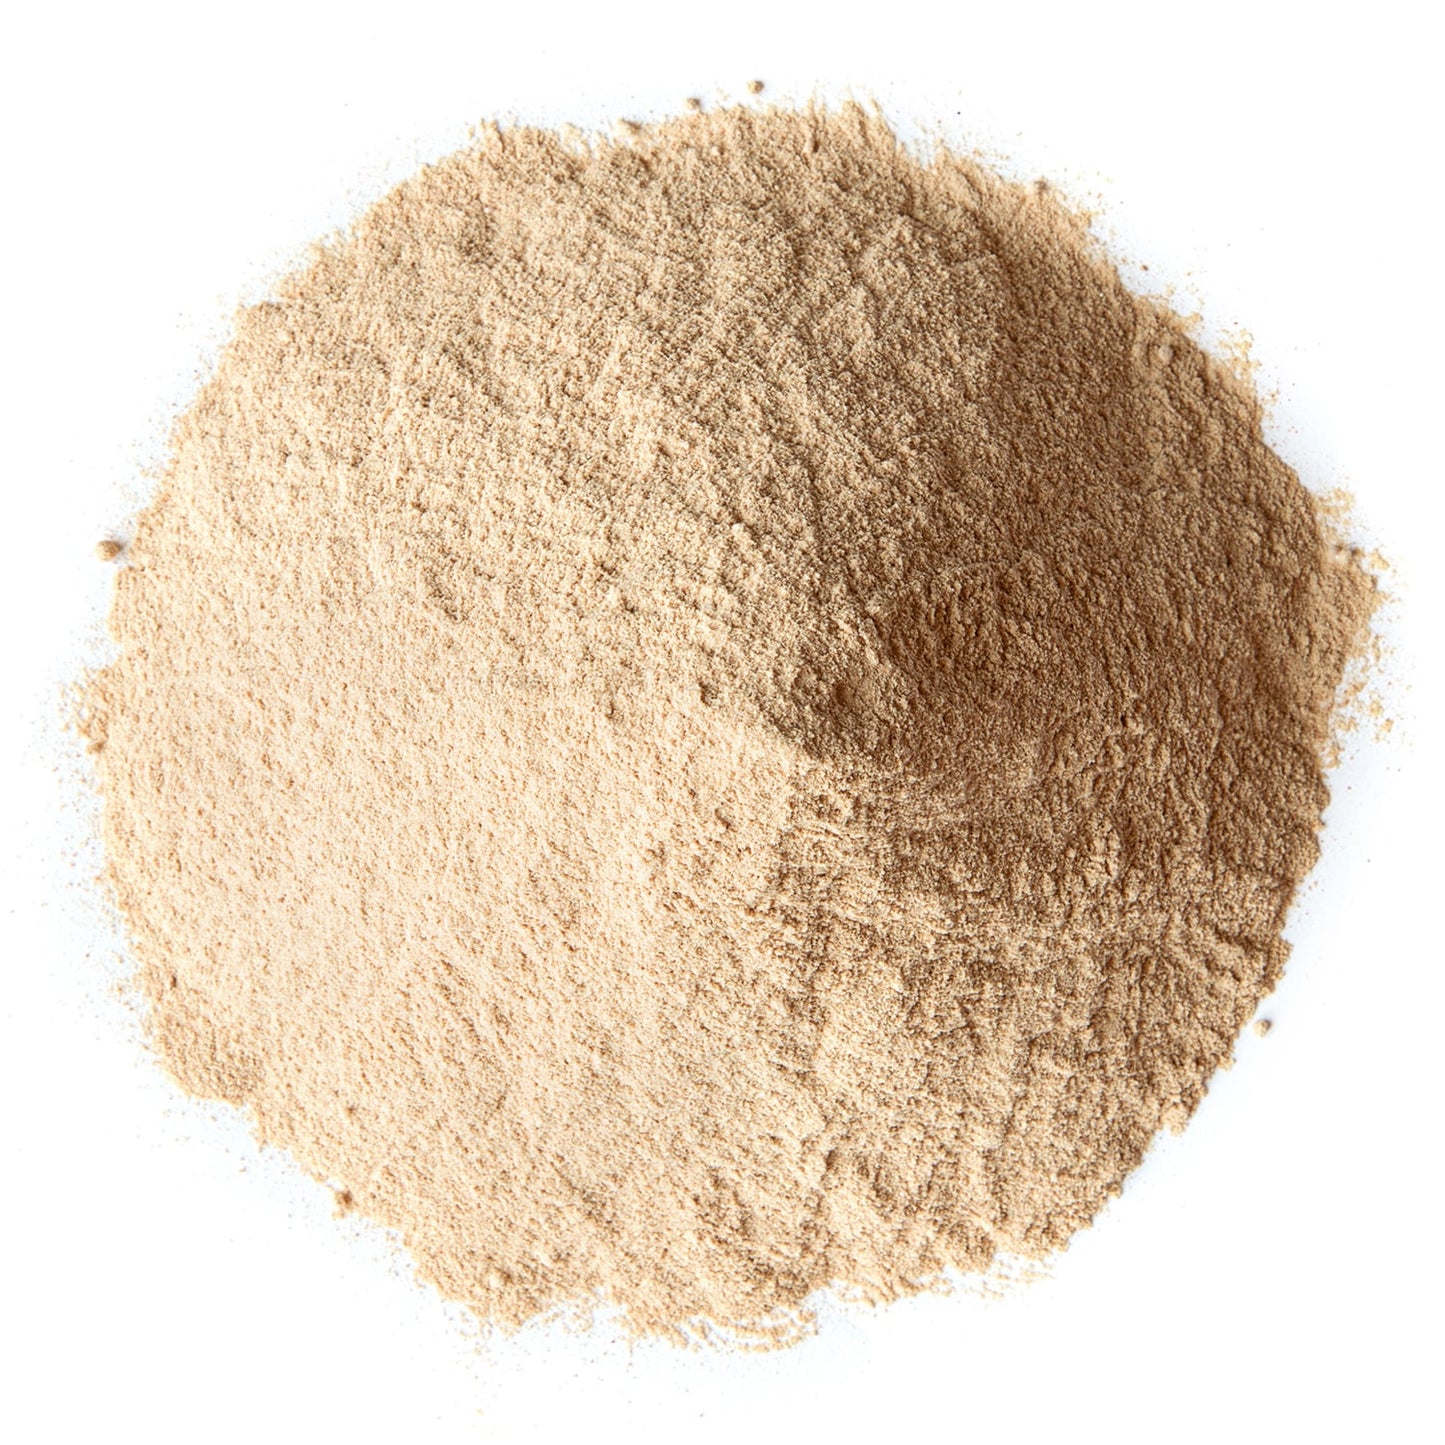 Lucuma Powder — Non-GMO Verified, Raw, 100% Pure, Paleo, Keto, Vegan, Peruvian Superfood, Bulk, Great for Juice, Drinks and Smoothies, Rich in Nutrients, Natural Sweetener Sugar Replacement